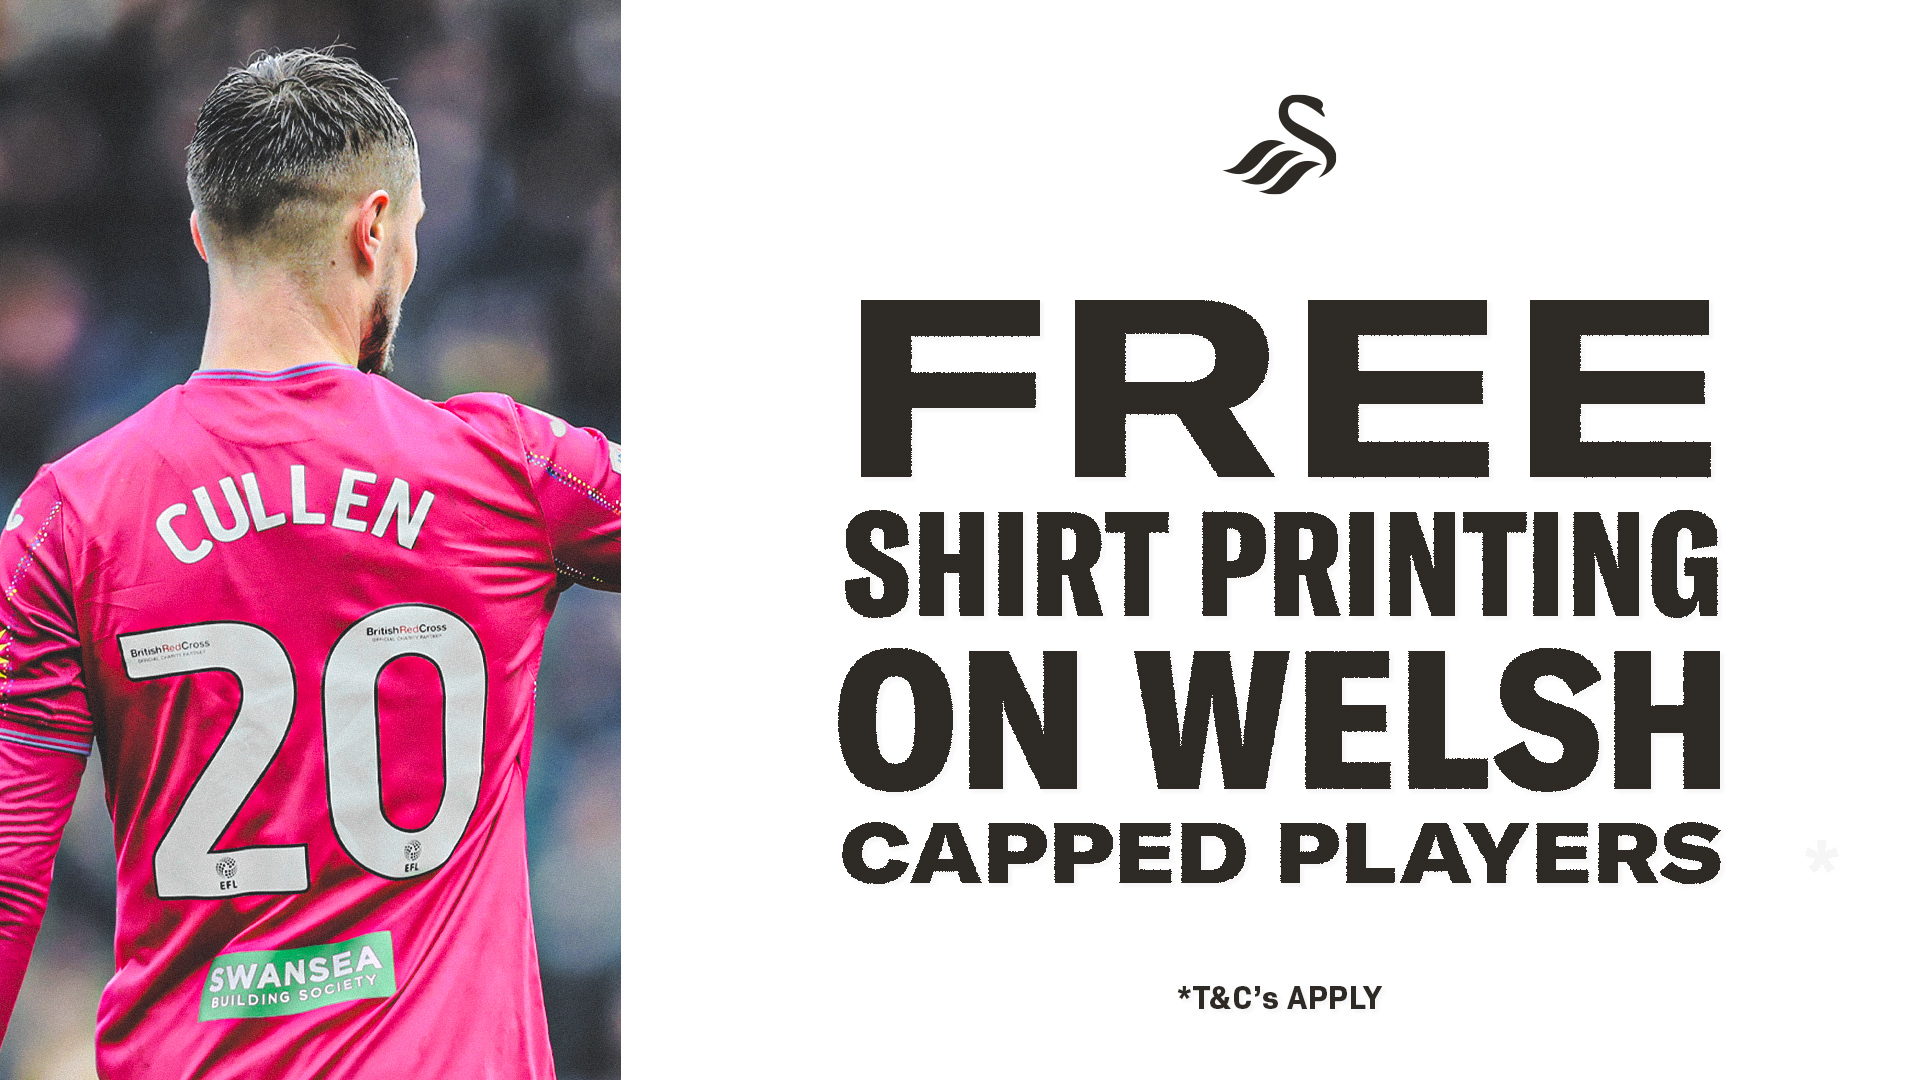 Free shirt printing on Welsh capped players